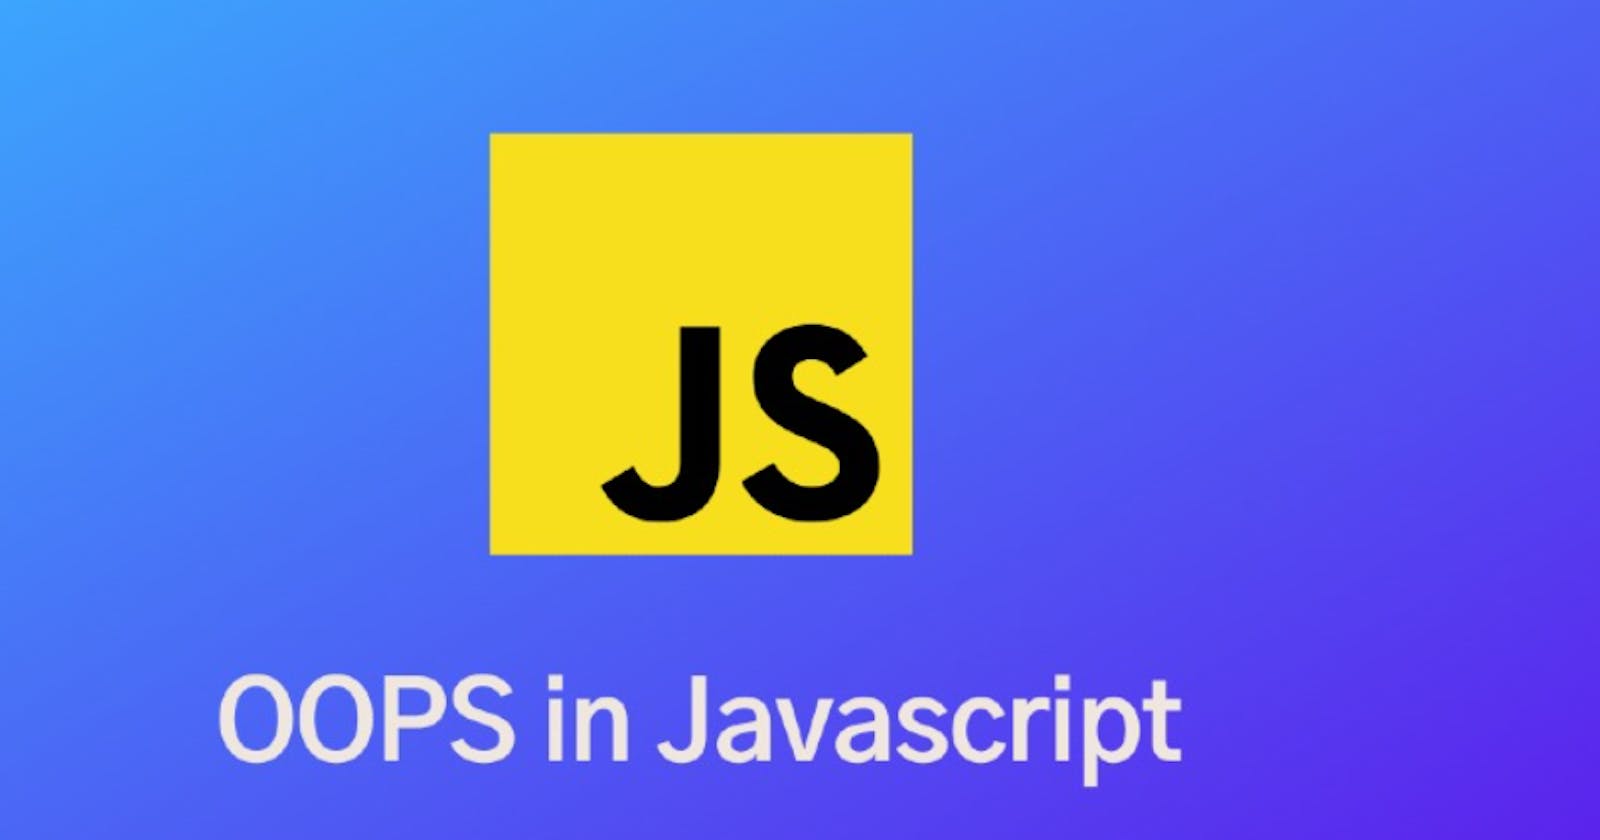 Object Oriented Programming in Javascript